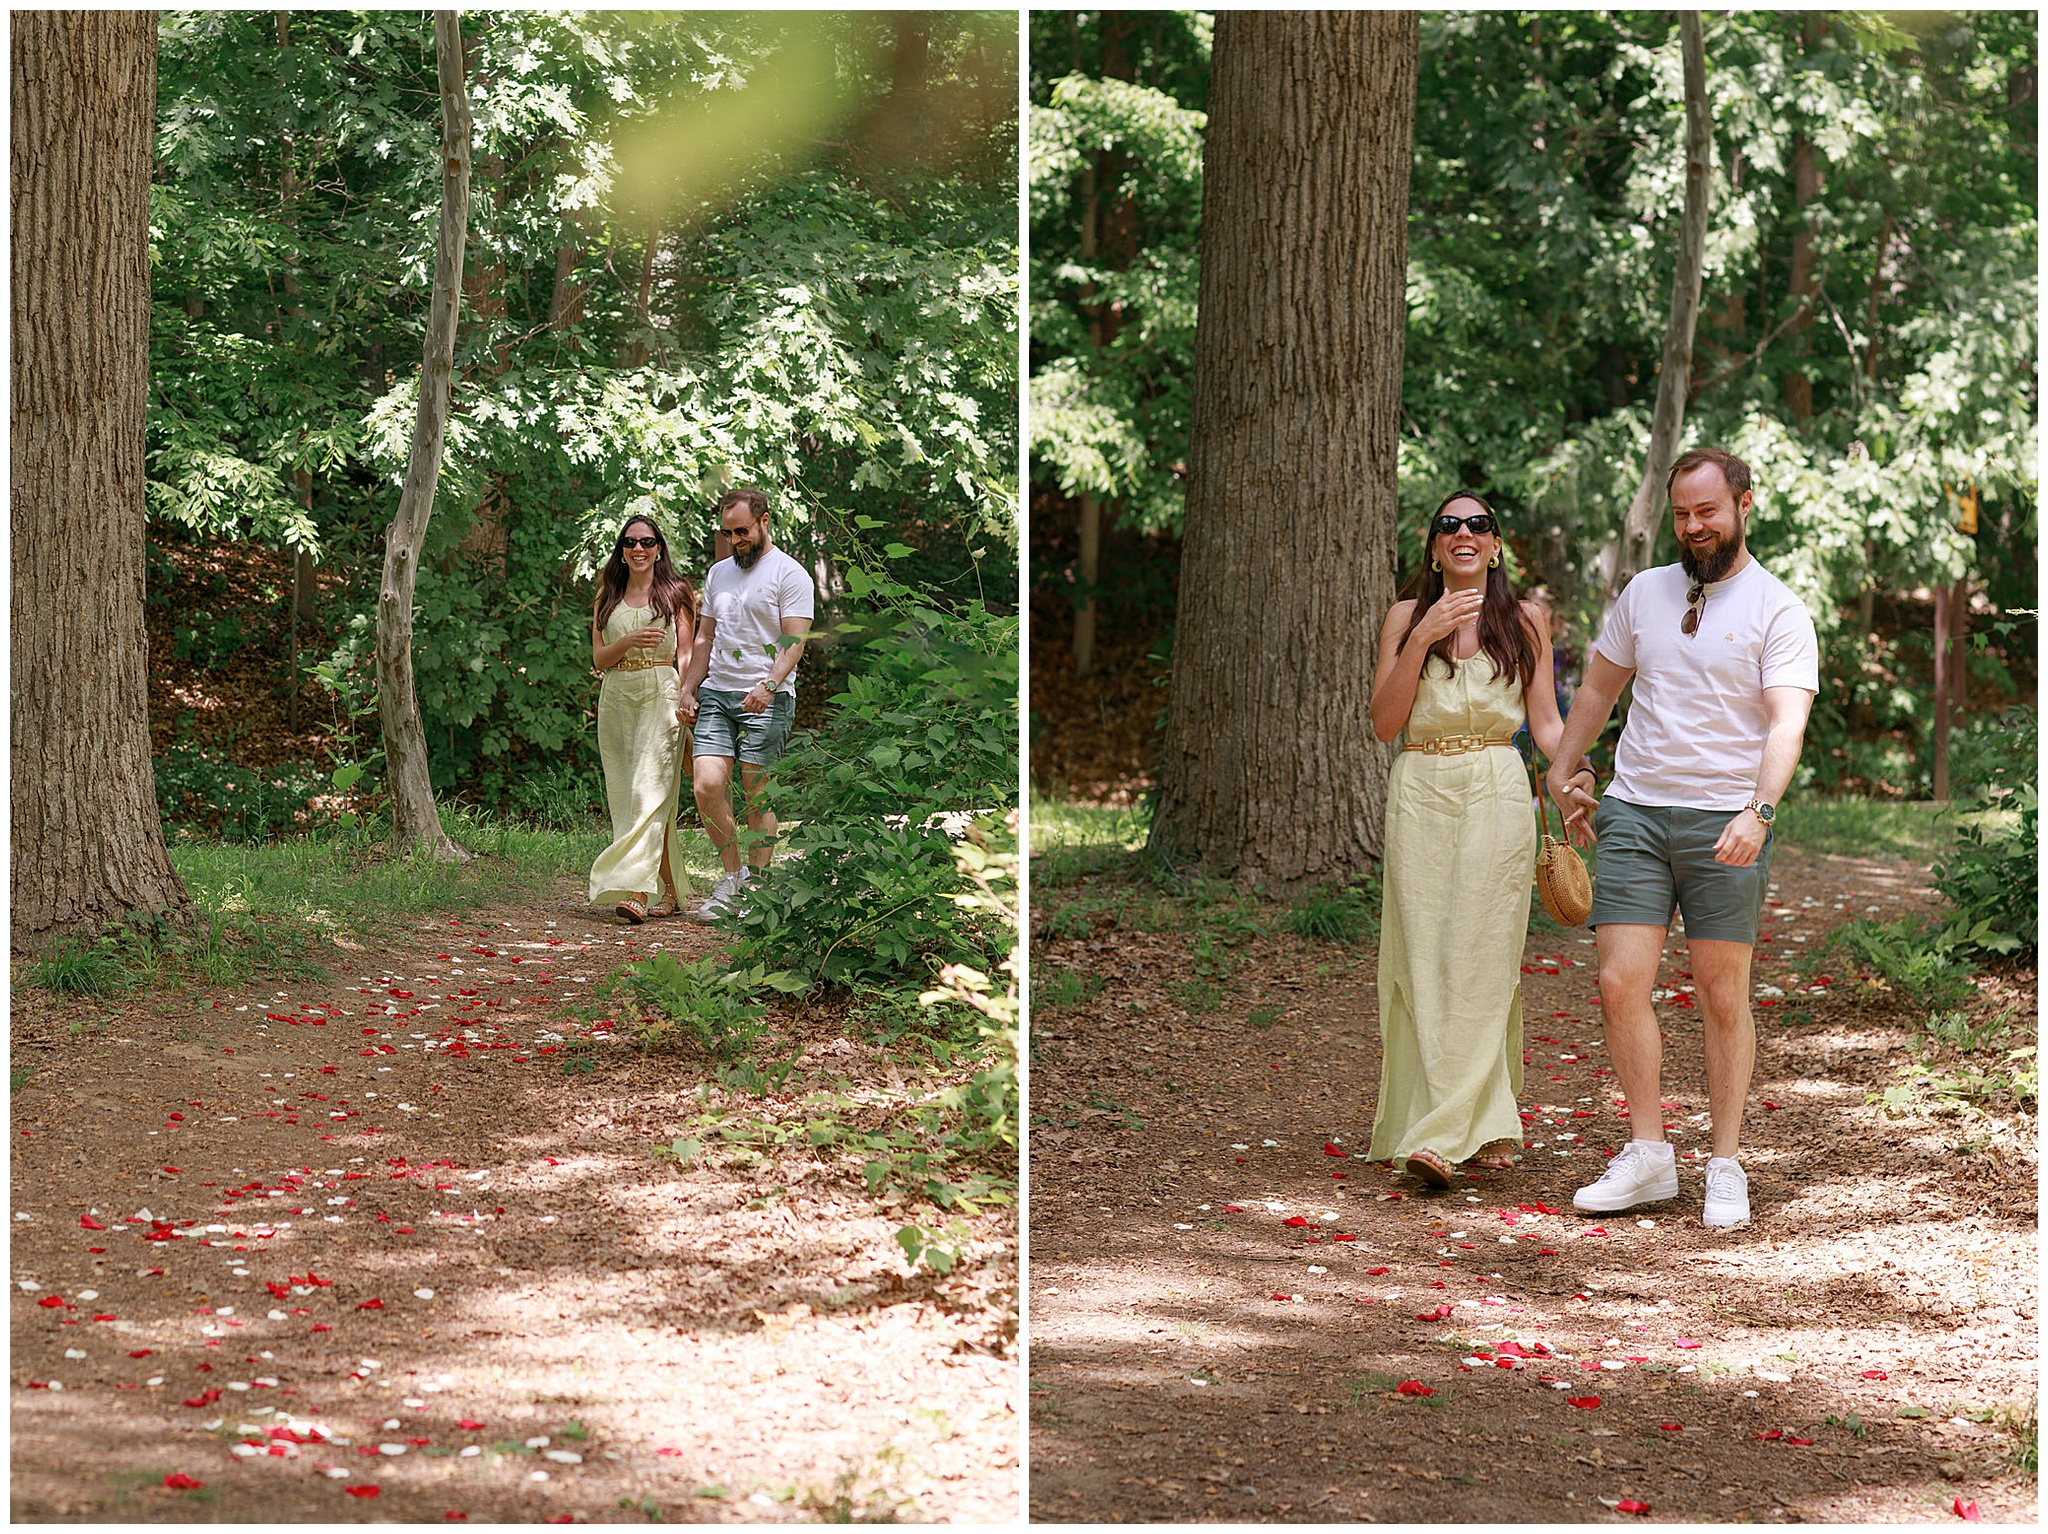 A couple walks down a park path laid with rose petals on way to proposal dc engagement photographer